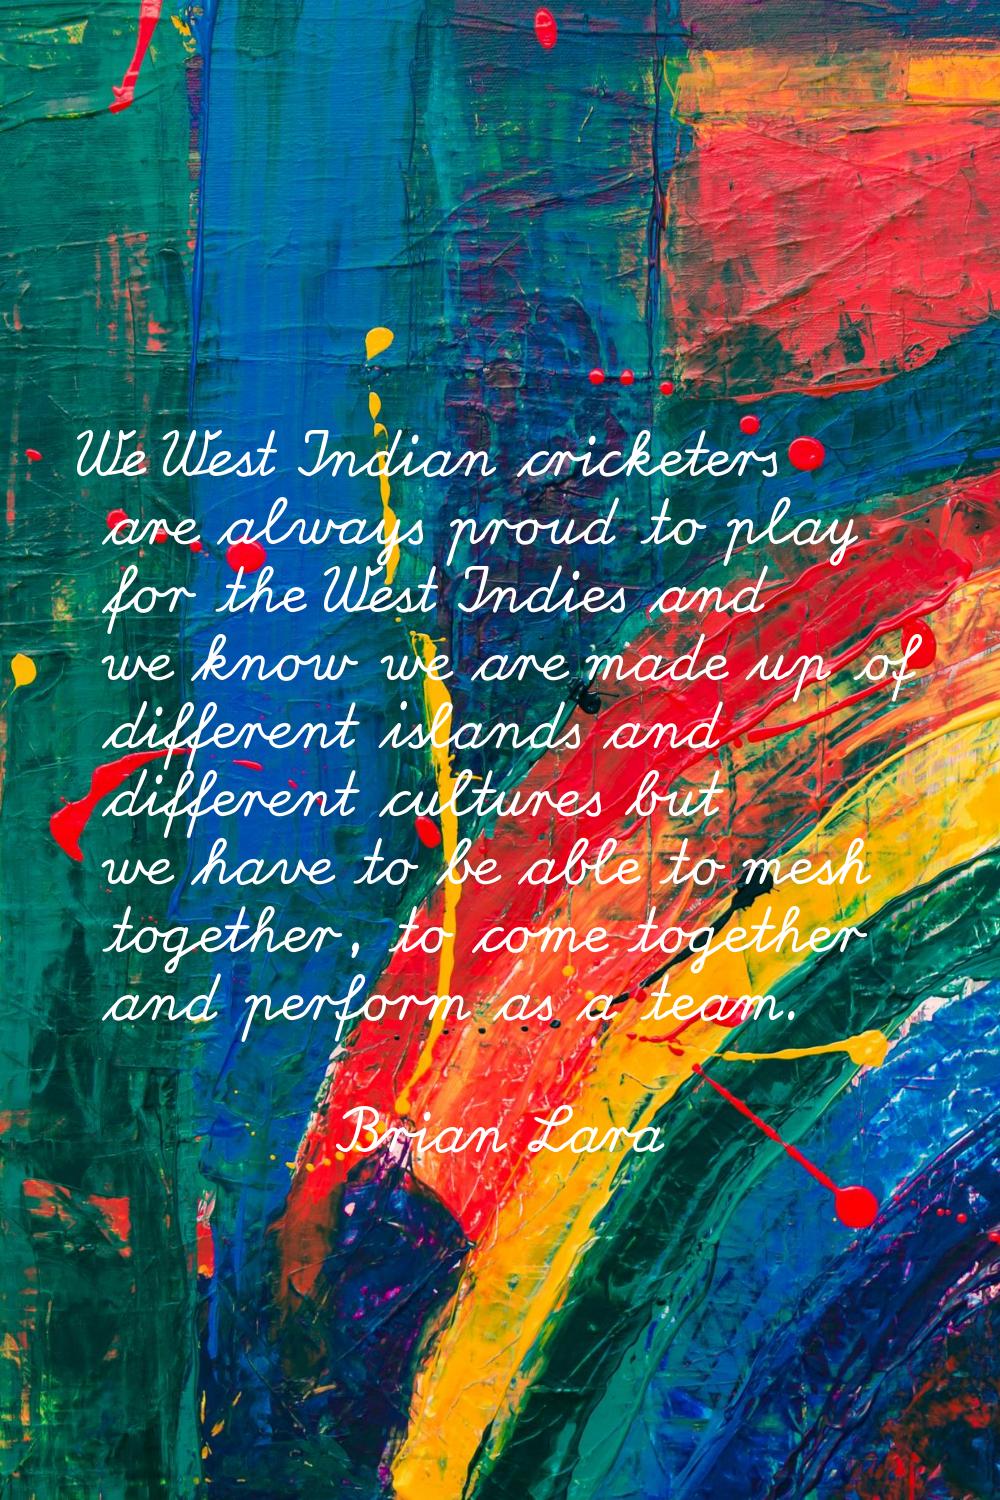 We West Indian cricketers are always proud to play for the West Indies and we know we are made up o